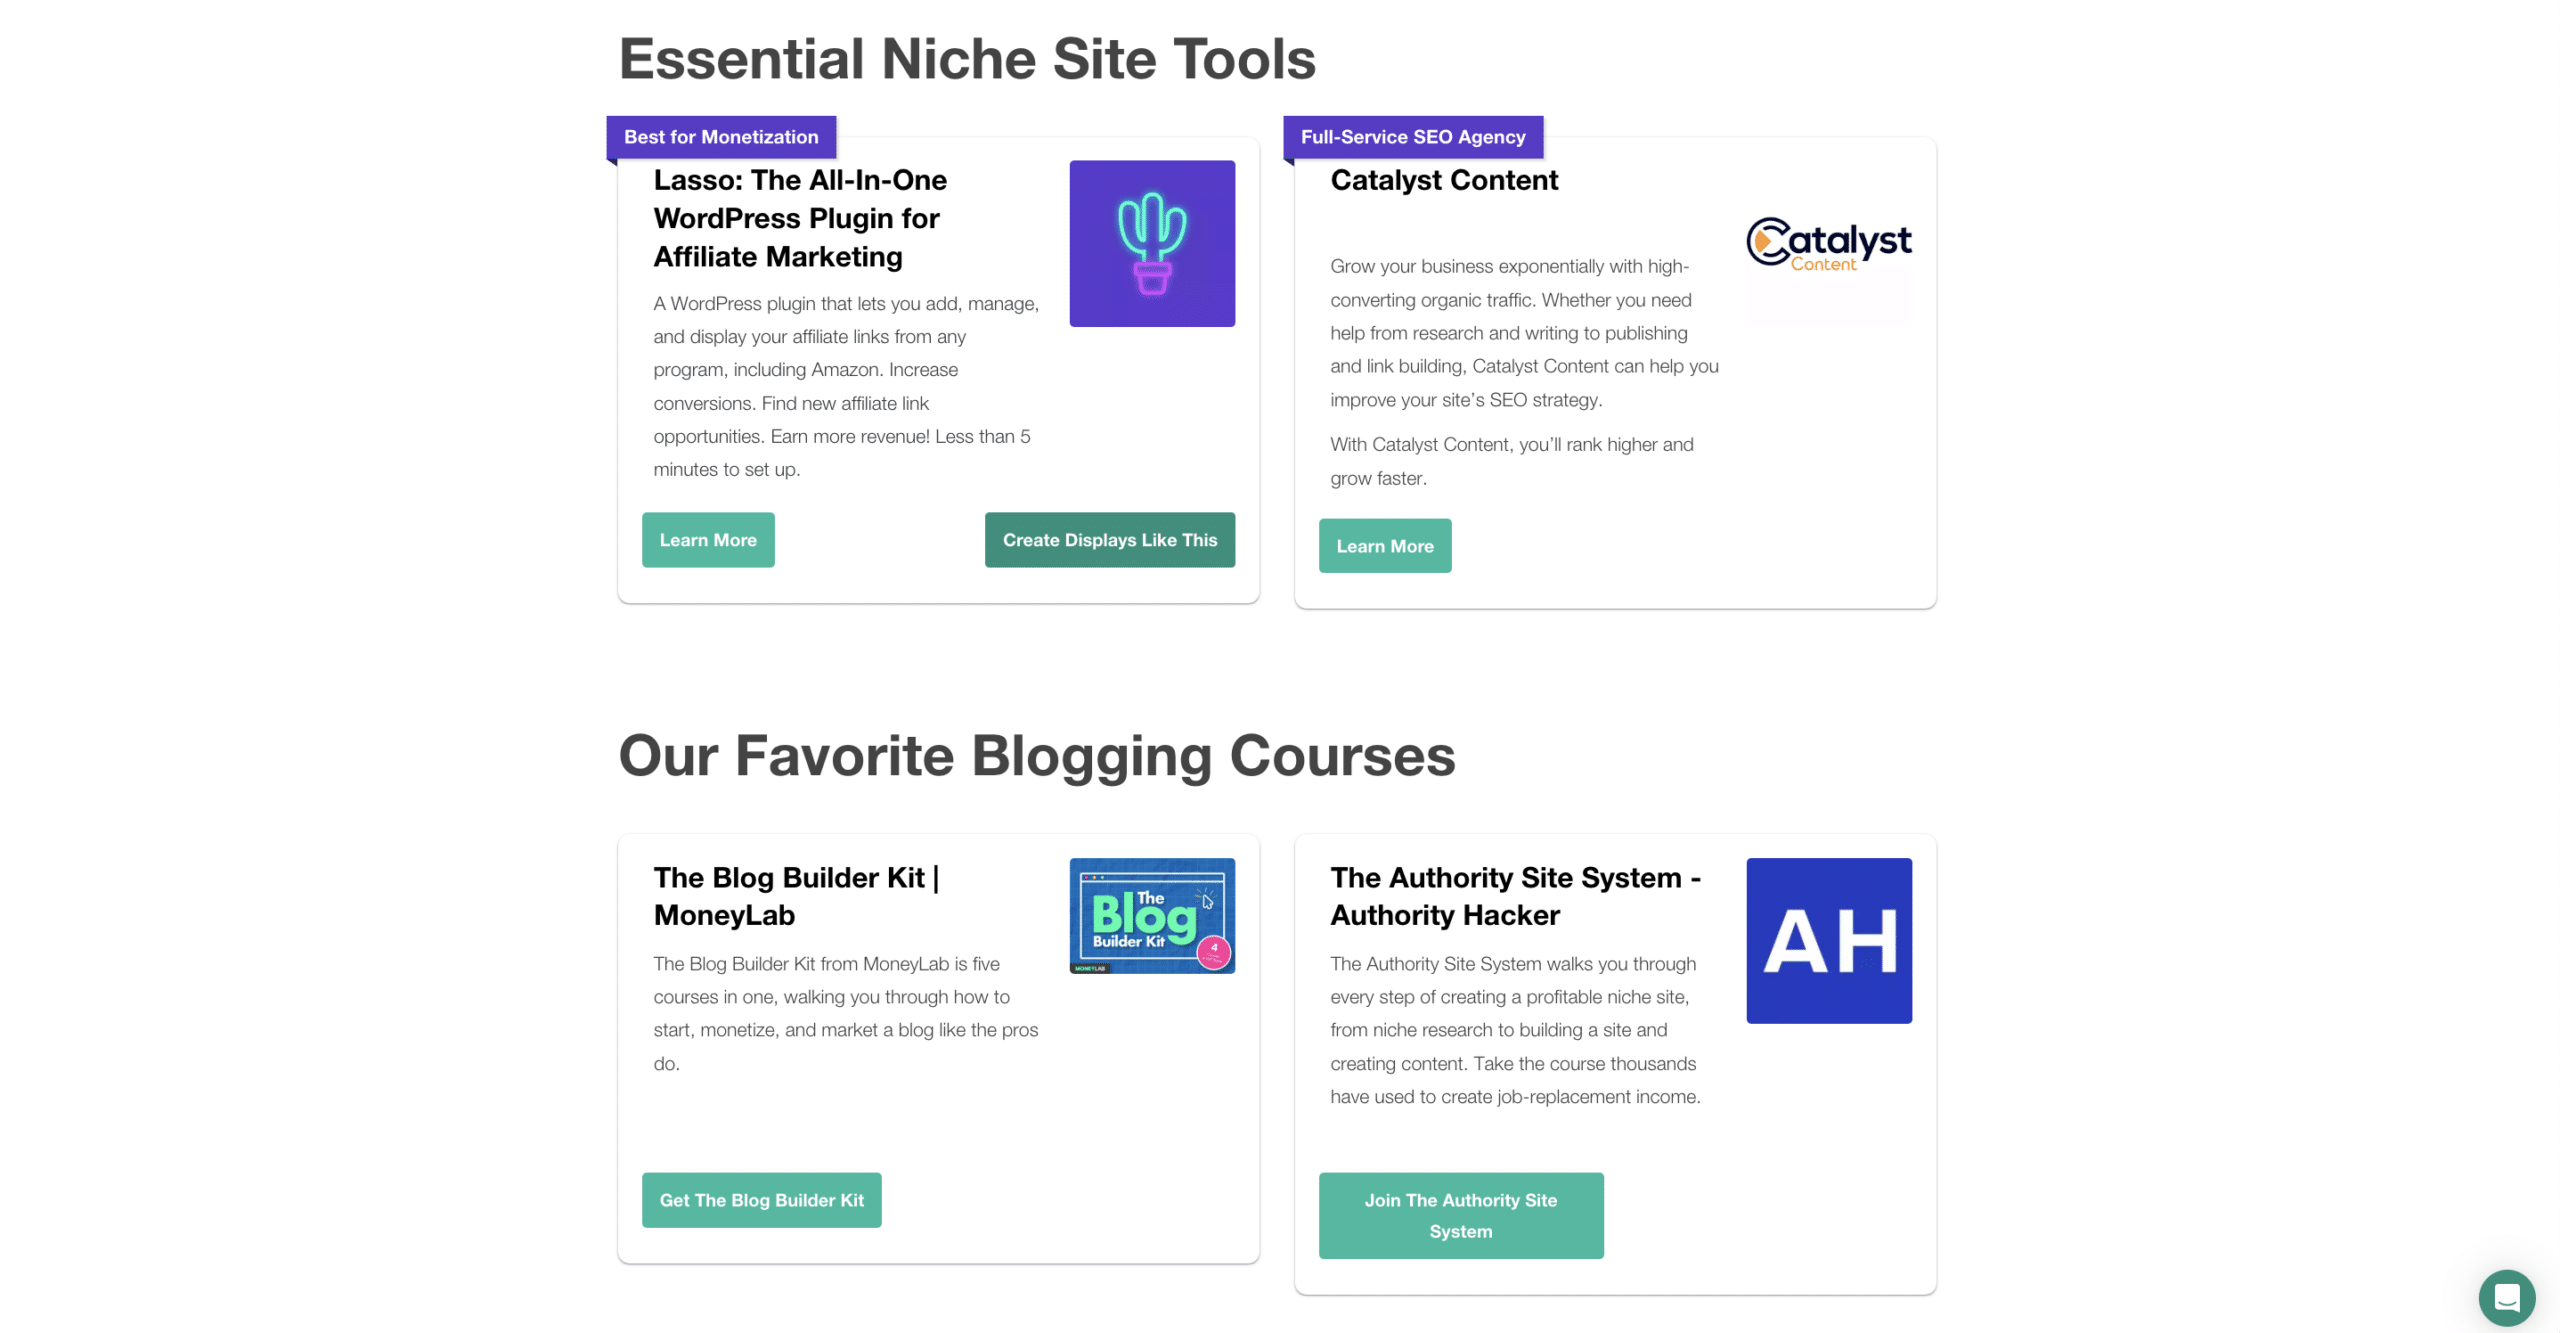 a screenshot of various product displays from our favorite tools and courses resources page on our website for building profitable online businesses